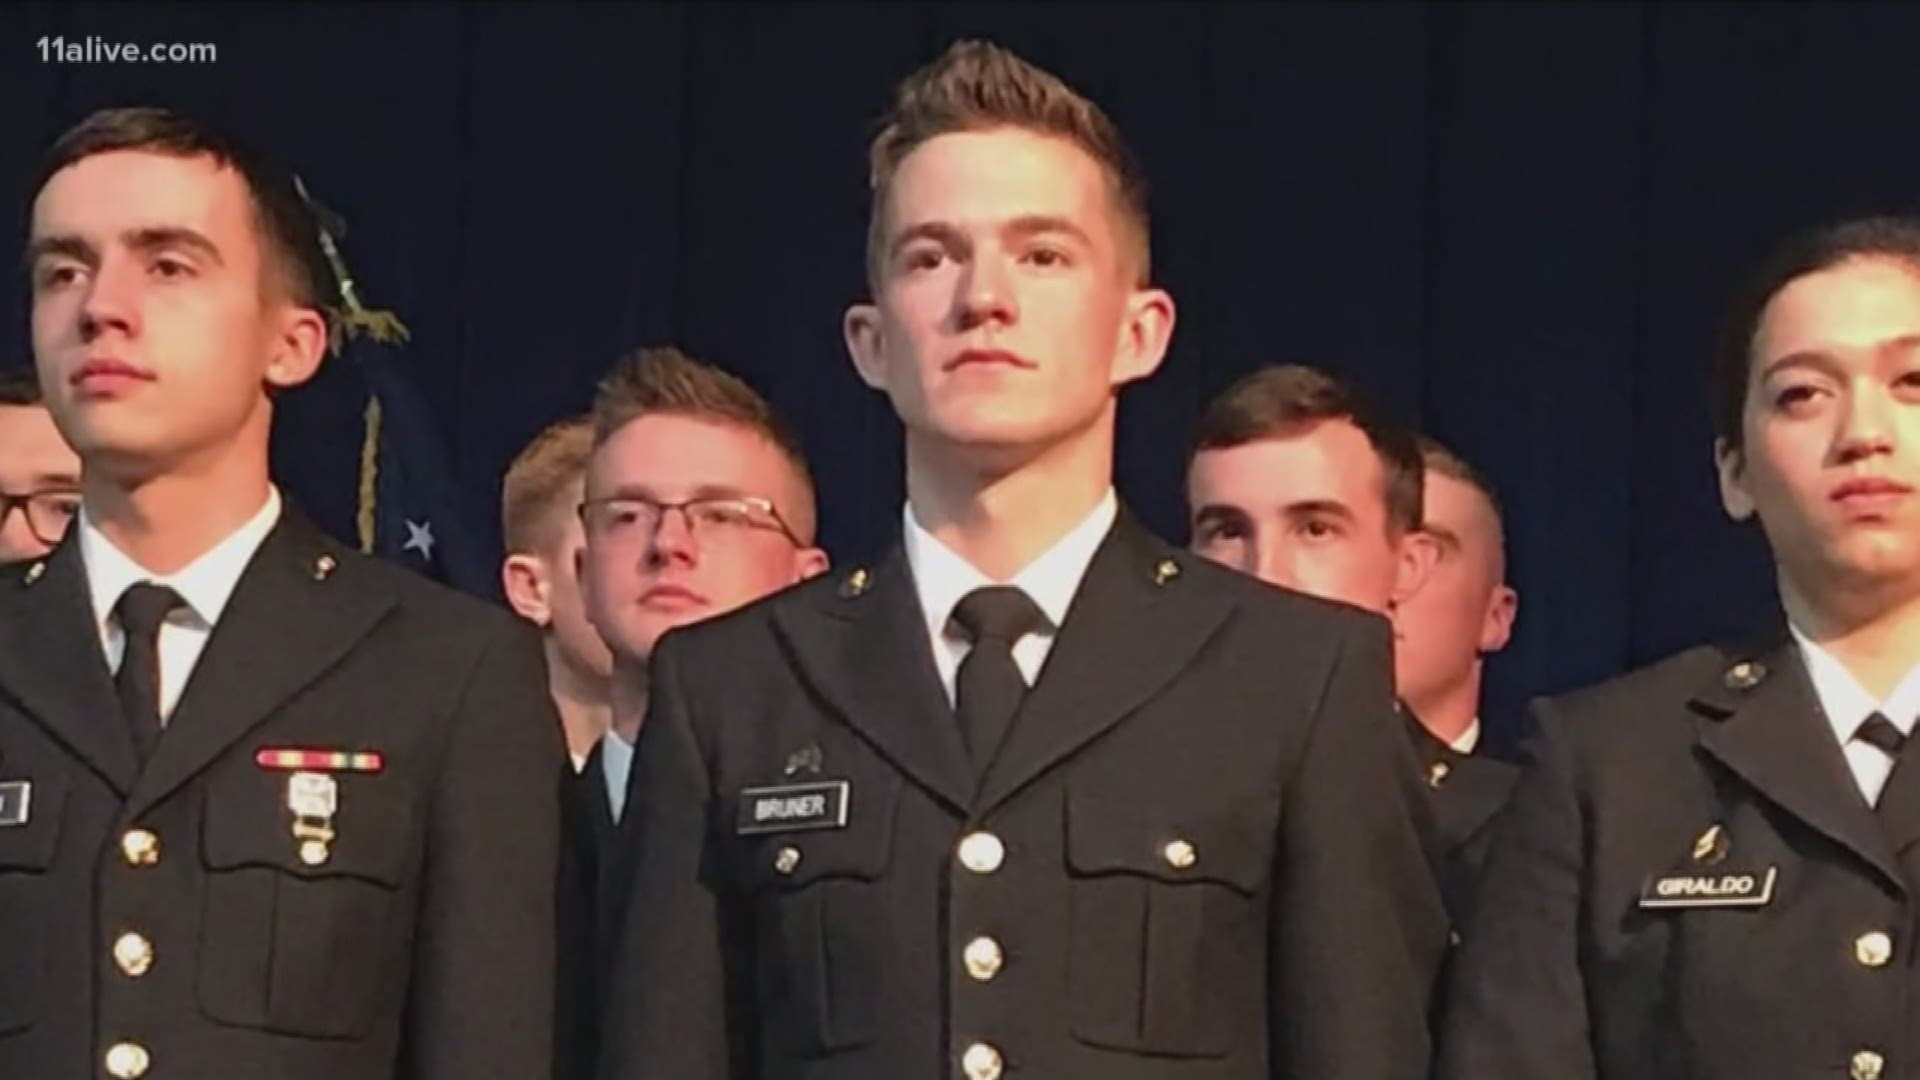 Cadet Benjamin Bruner is in surgery after colliding with a suspected DUI driver while on his way to the Military School at University of North Georgia.